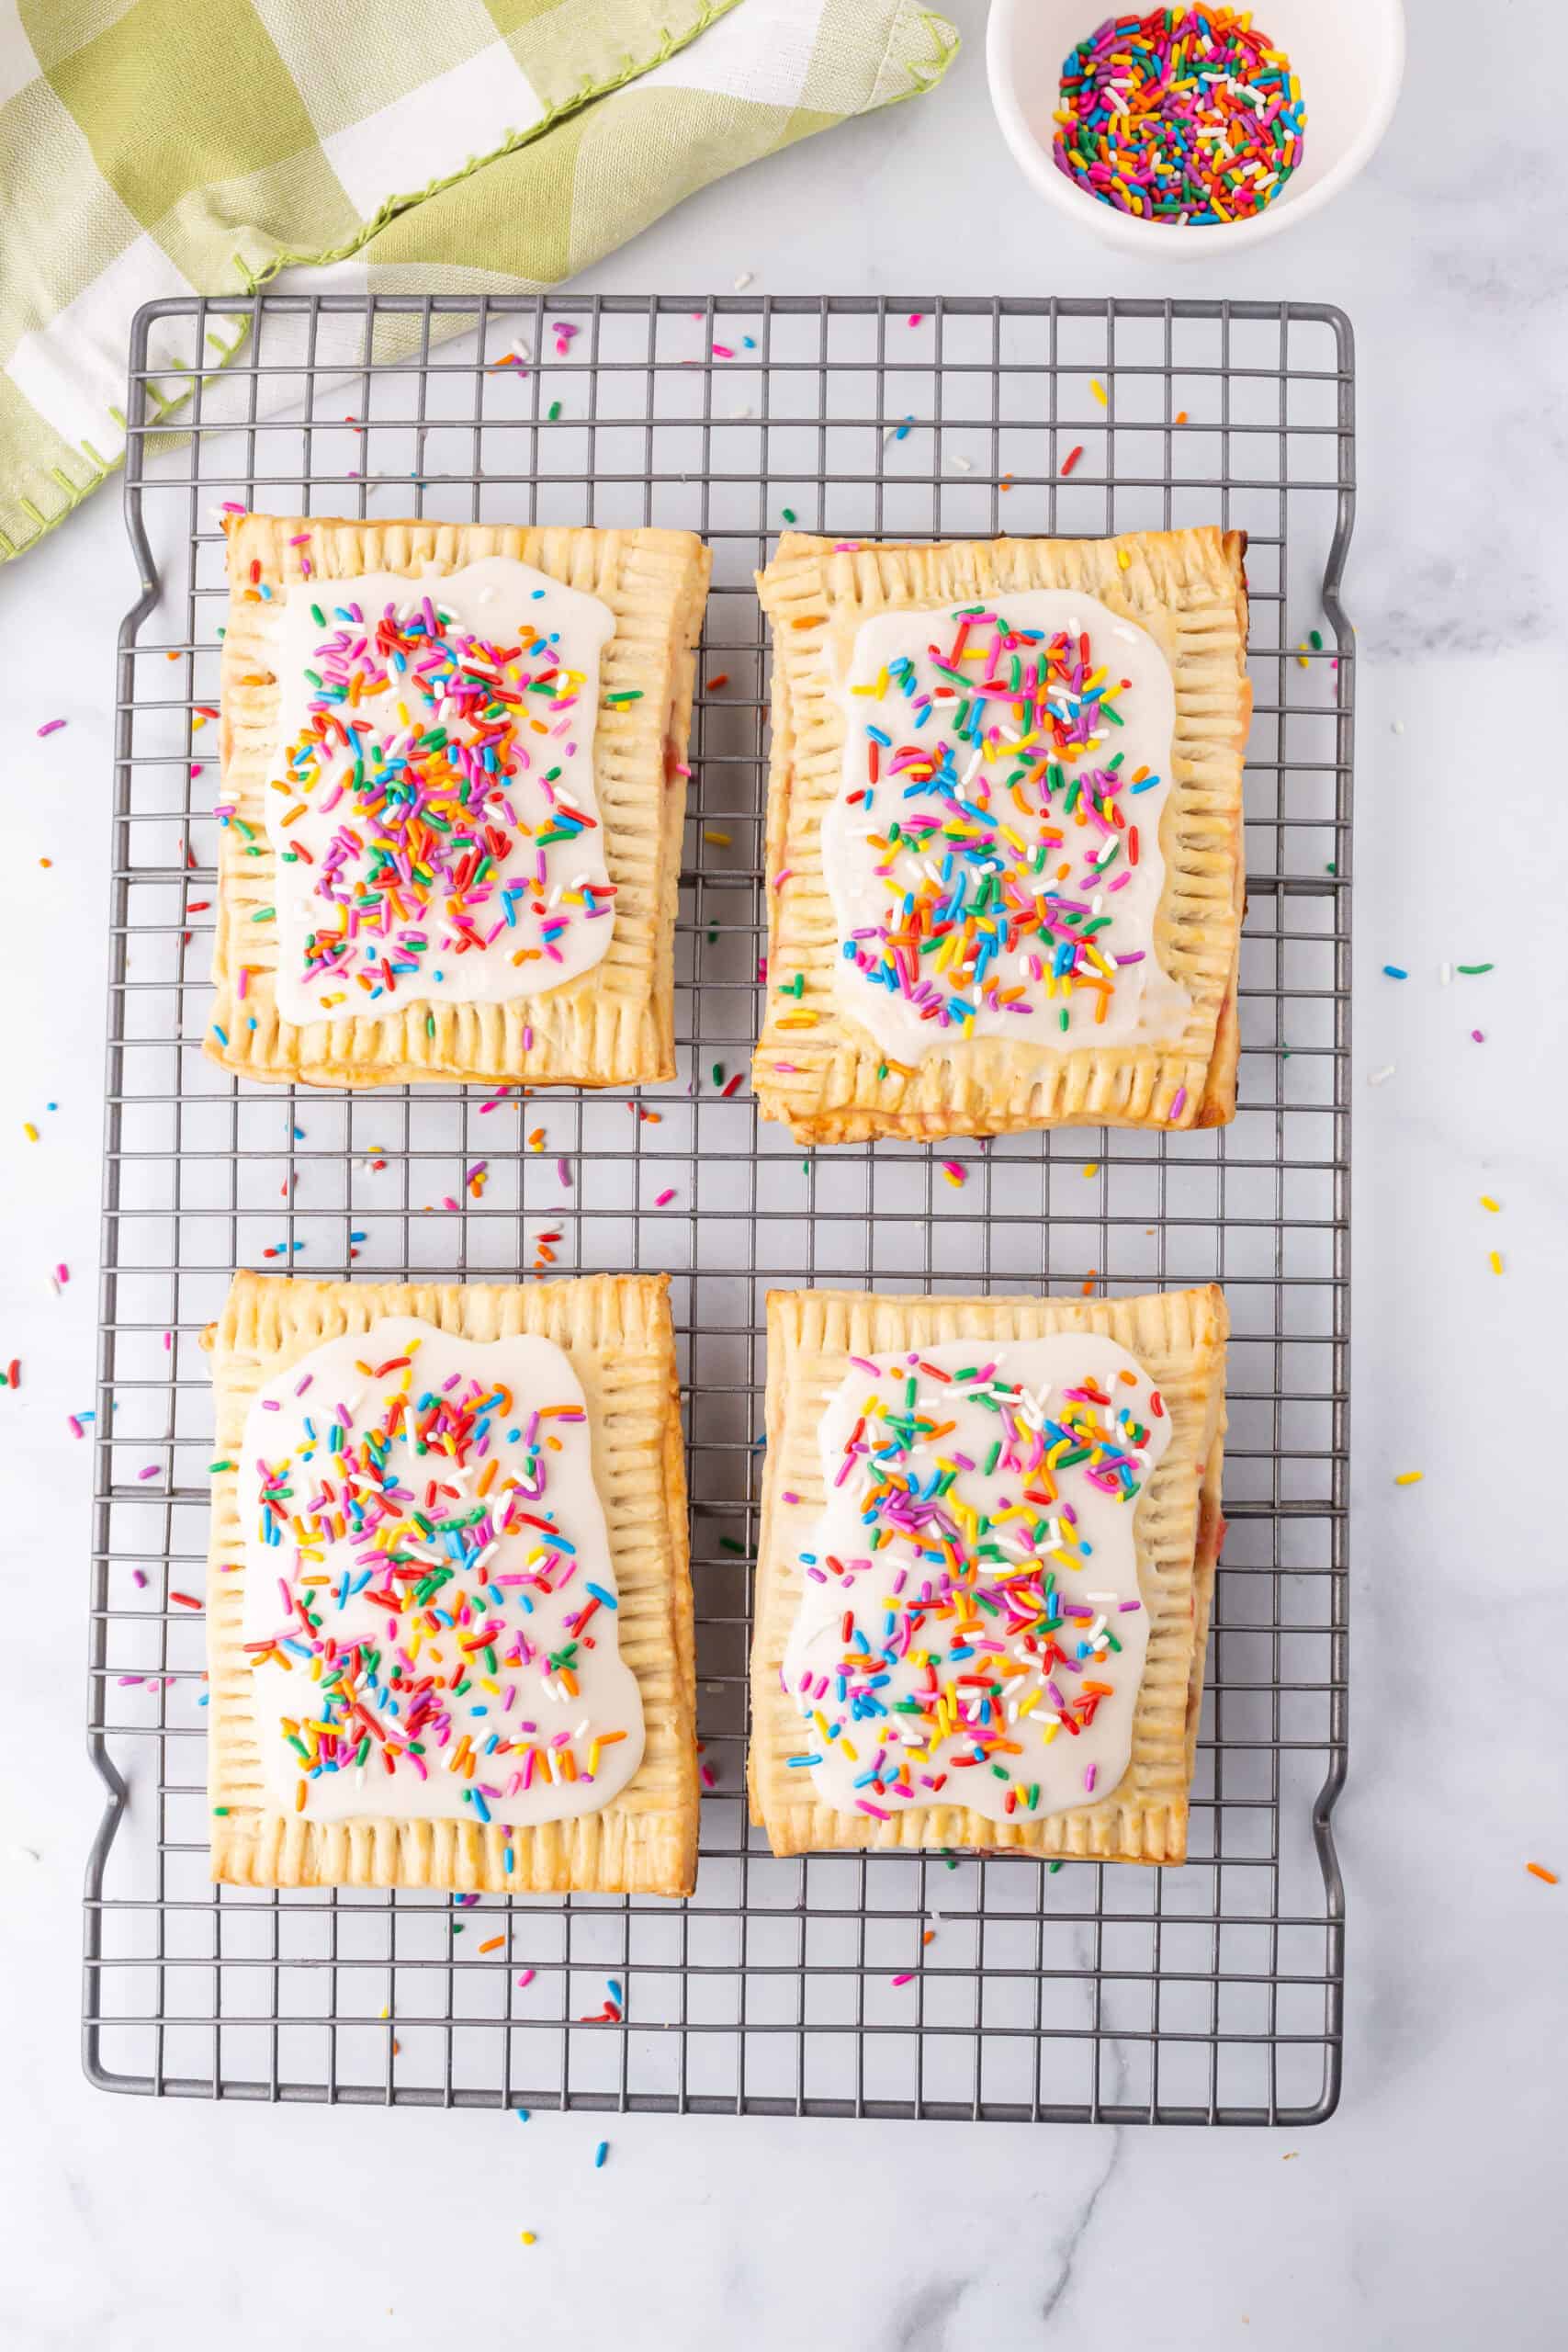 strawberry pop tarts with sprinkles on top